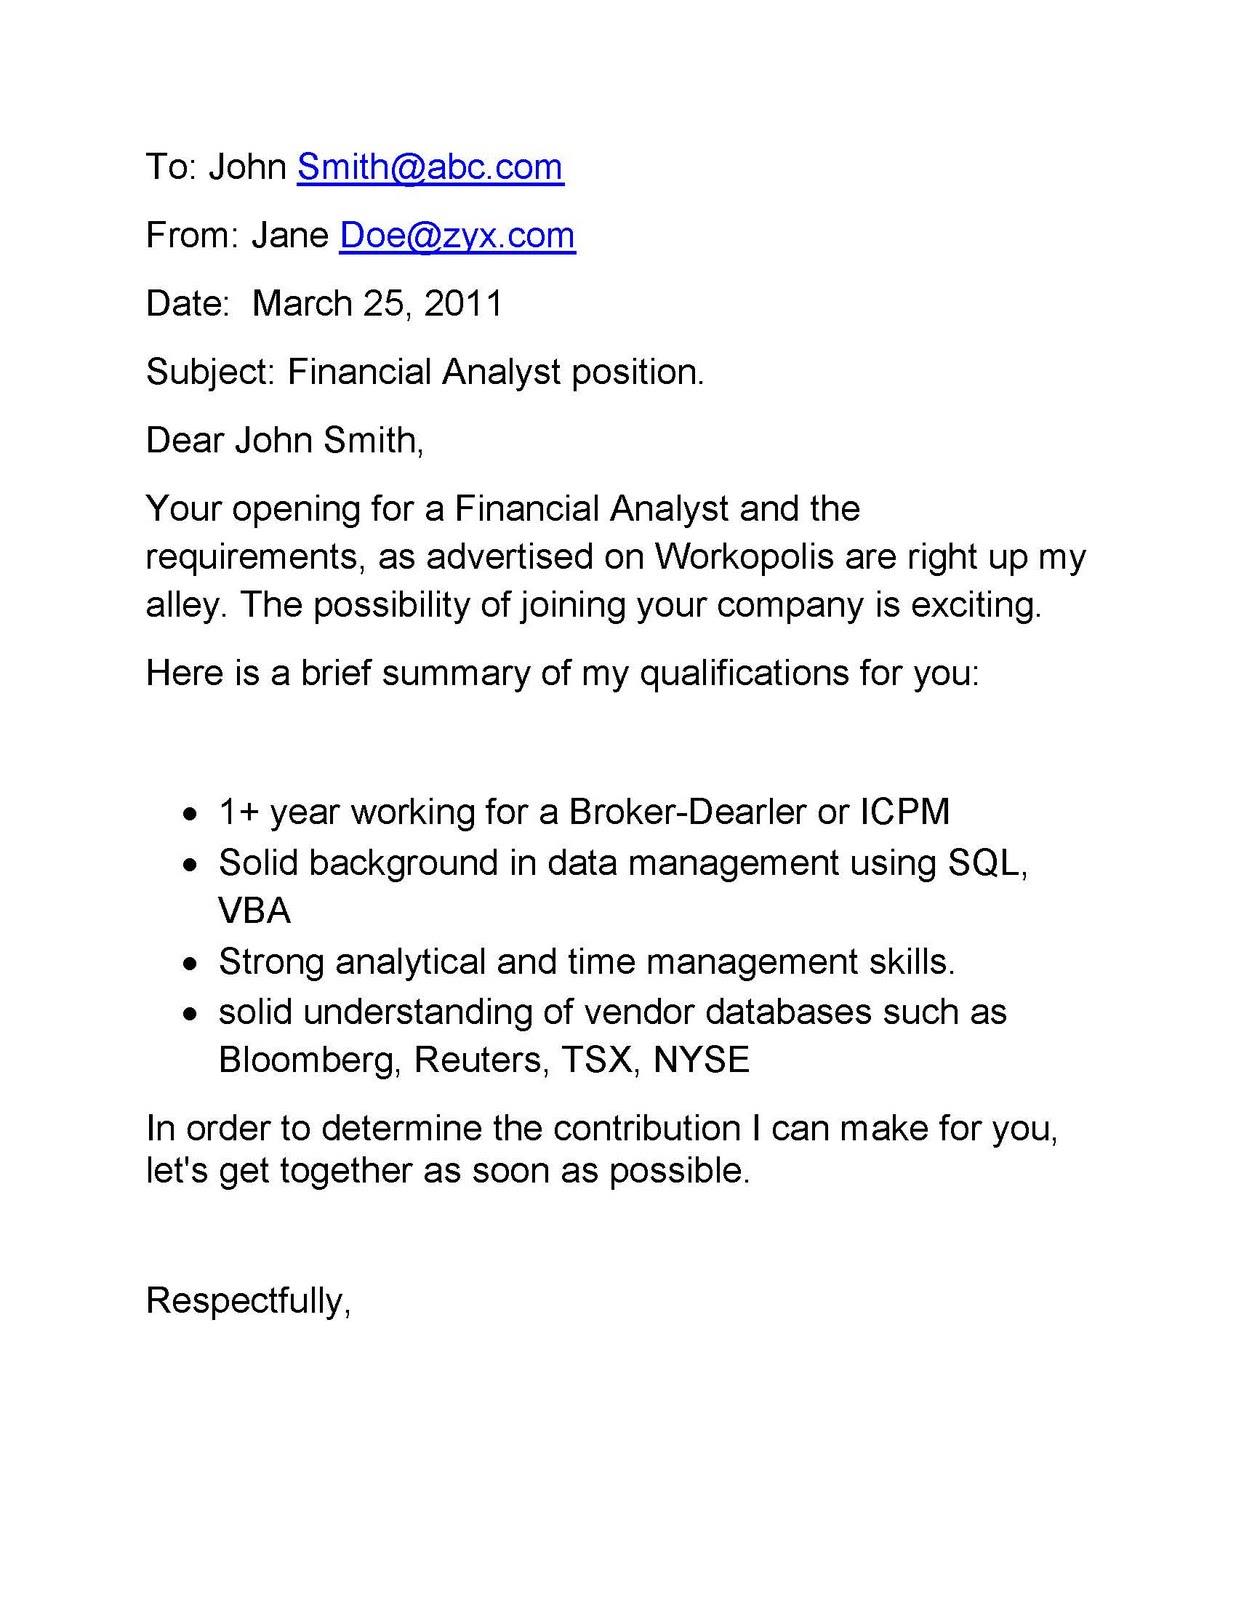 Sample cover letter in email format